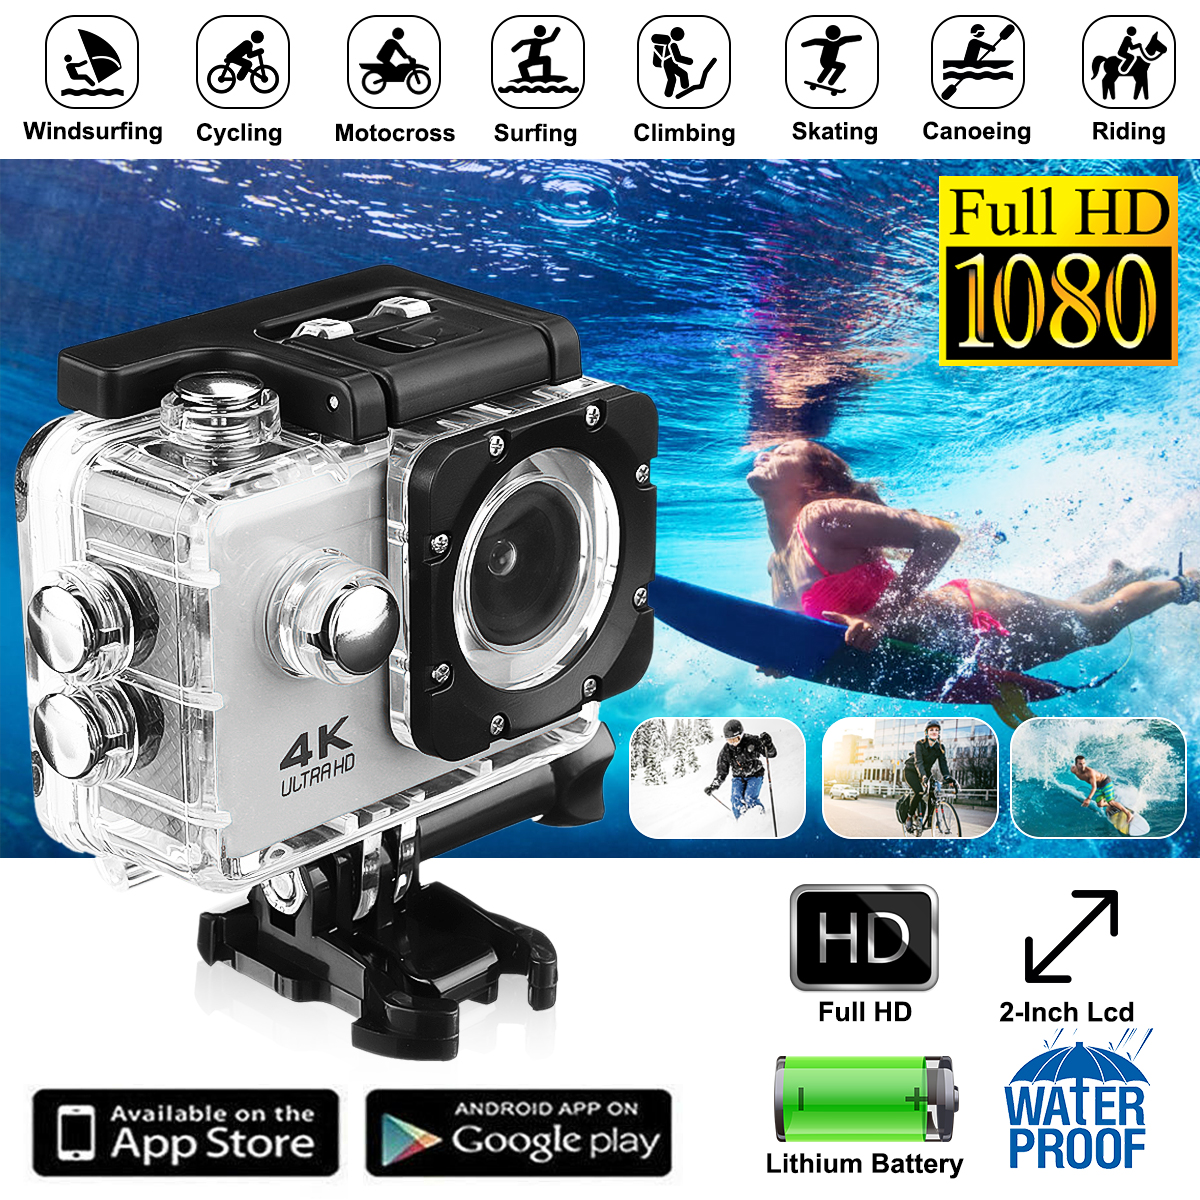 4K-Action-Camera-WiFi-Sports-Camera-Ultra-HD-30M-170deg-Wide-Angle-Waterproof-DV-Camcorder-with-EIS--1342356-1